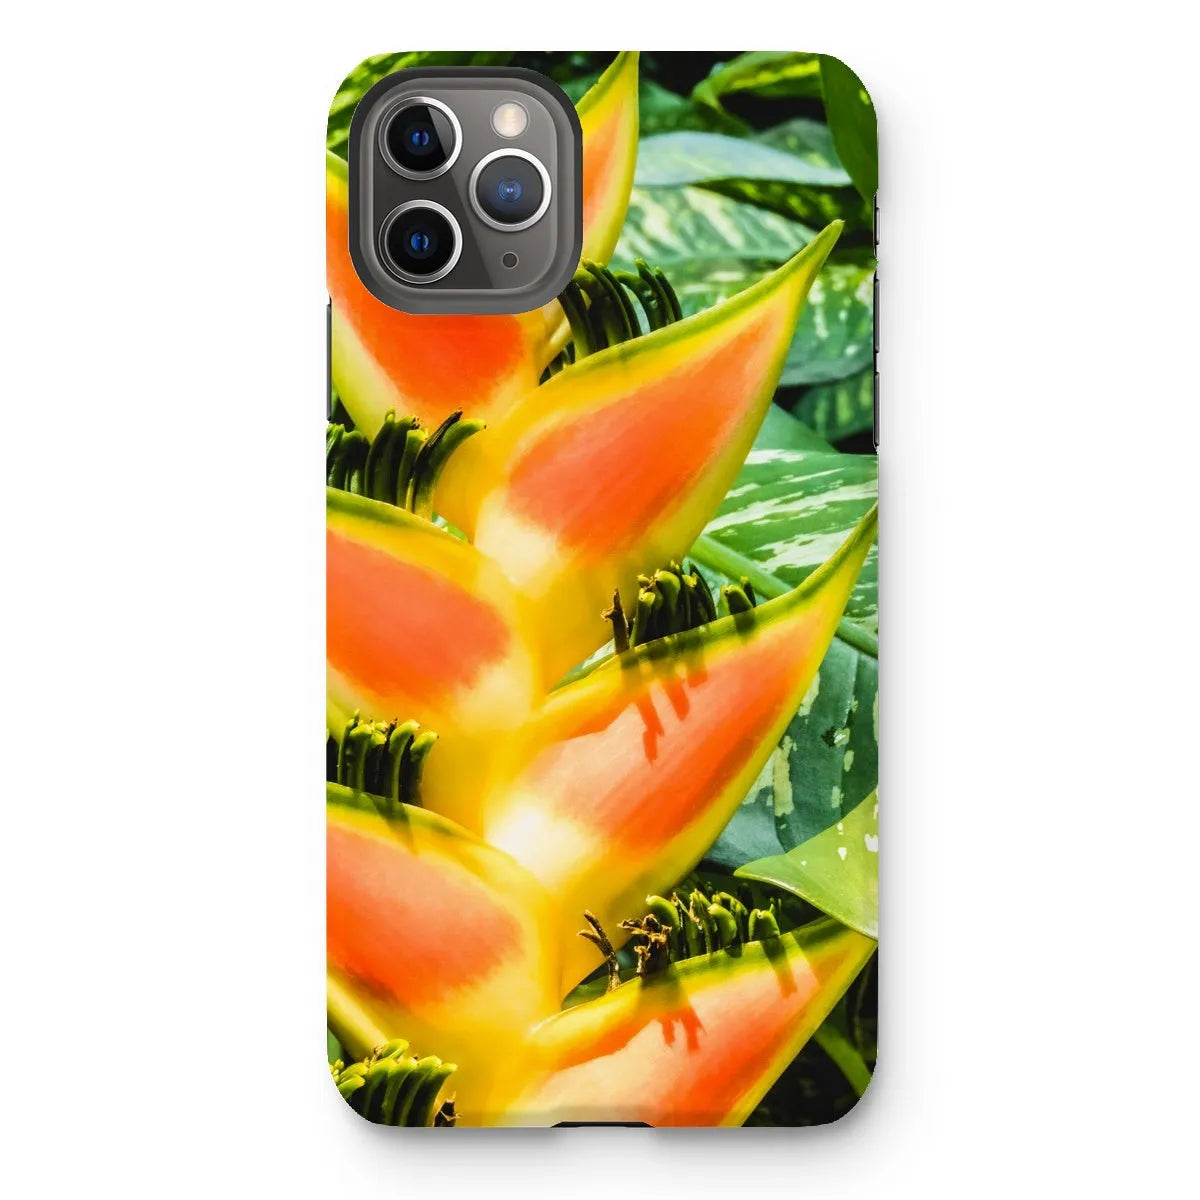 Showstopper Tough Phone Case - Iphone 11 Pro Max / Matte - Mobile Phone Cases - Aesthetic Art